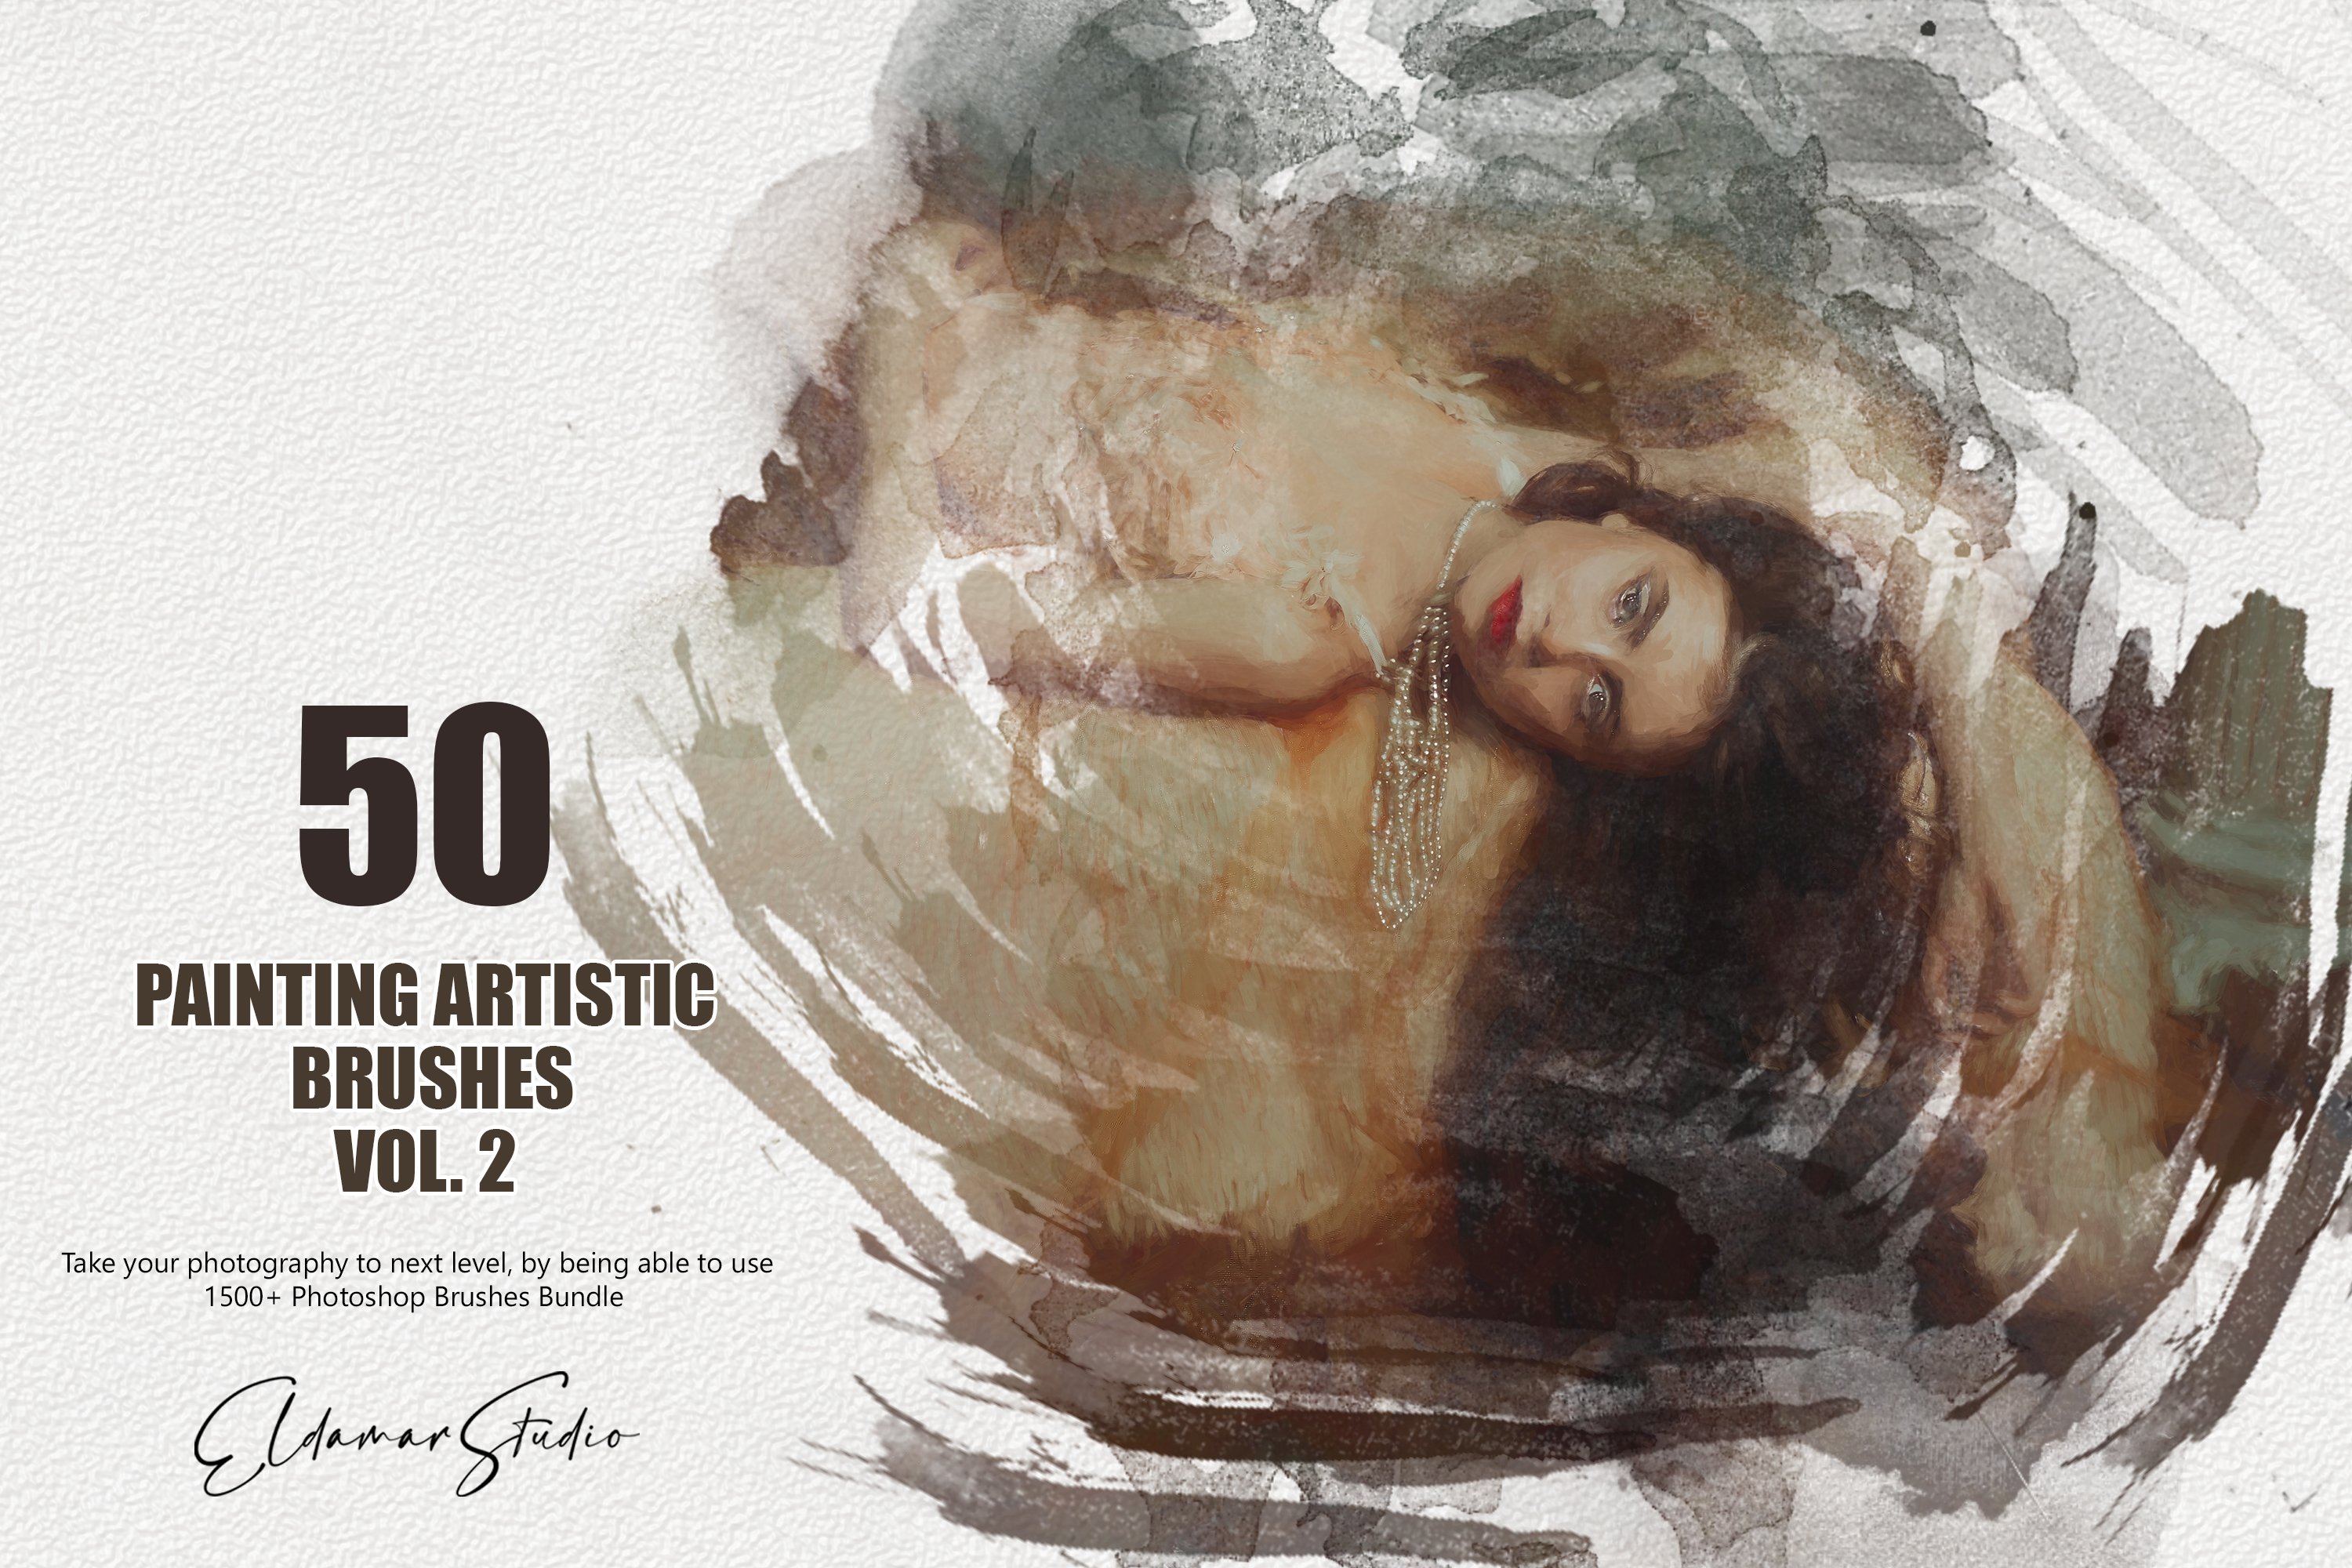 50 Painting Artistic Brushes - Vol.2cover image.